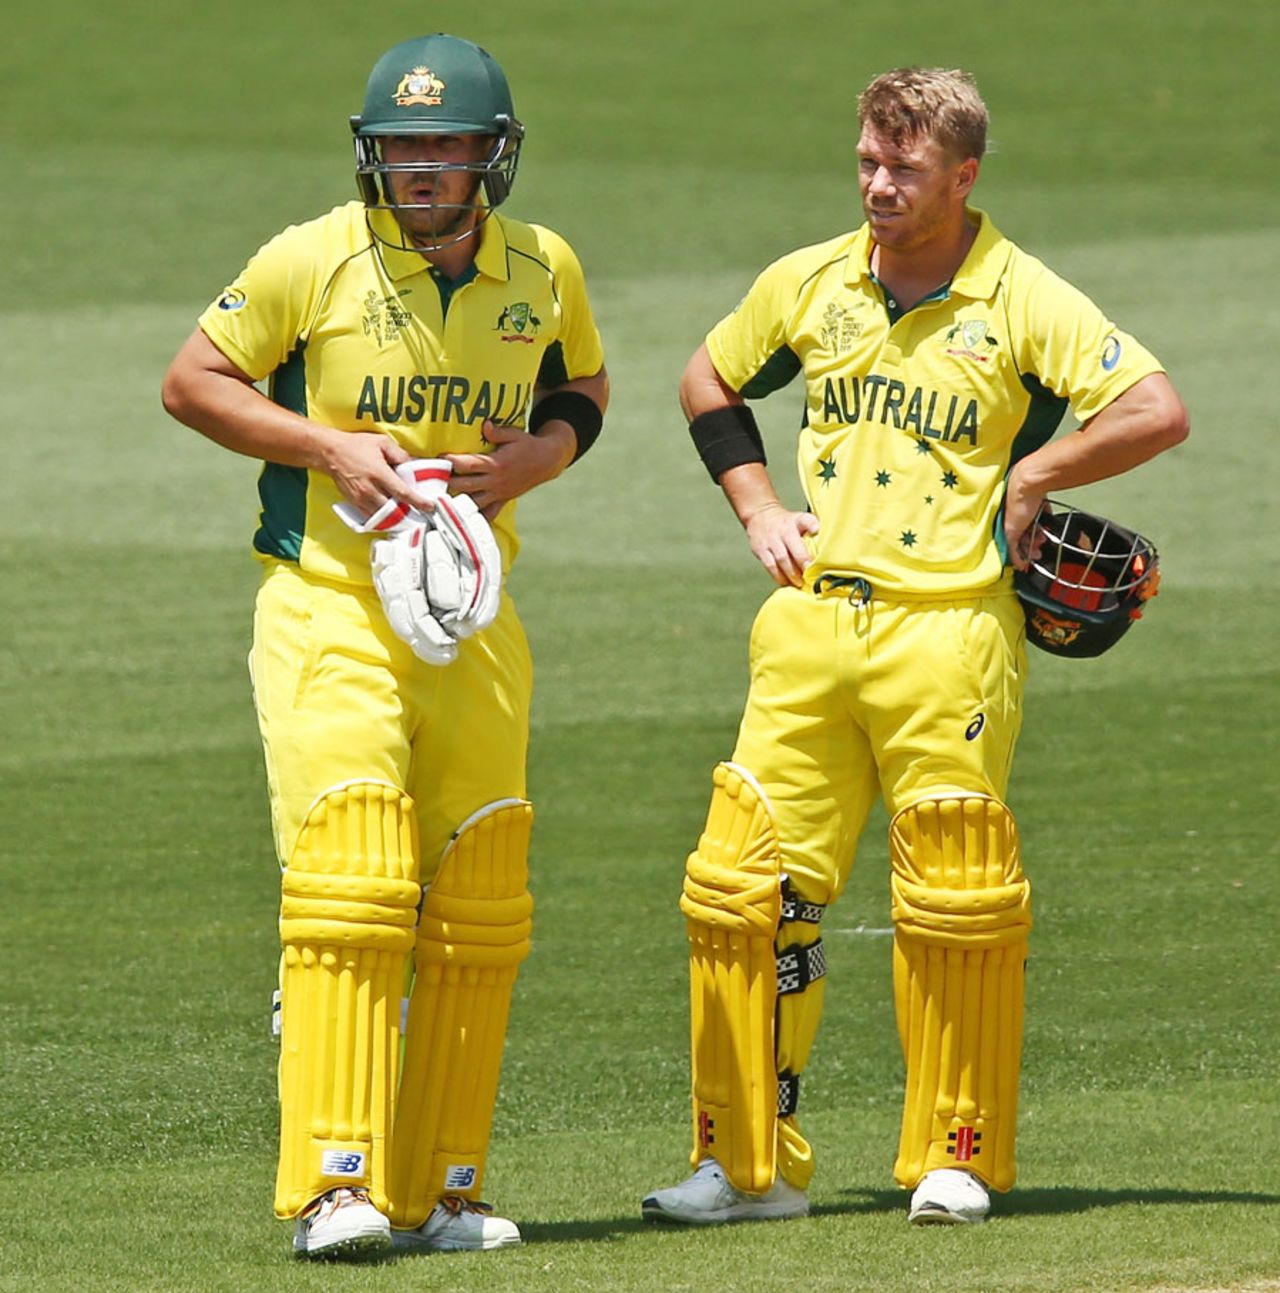 David Warner and Aaron Finch added 62 for the opening wicket, Australia v India, World Cup warm-ups, Adelaide, February 8, 2015